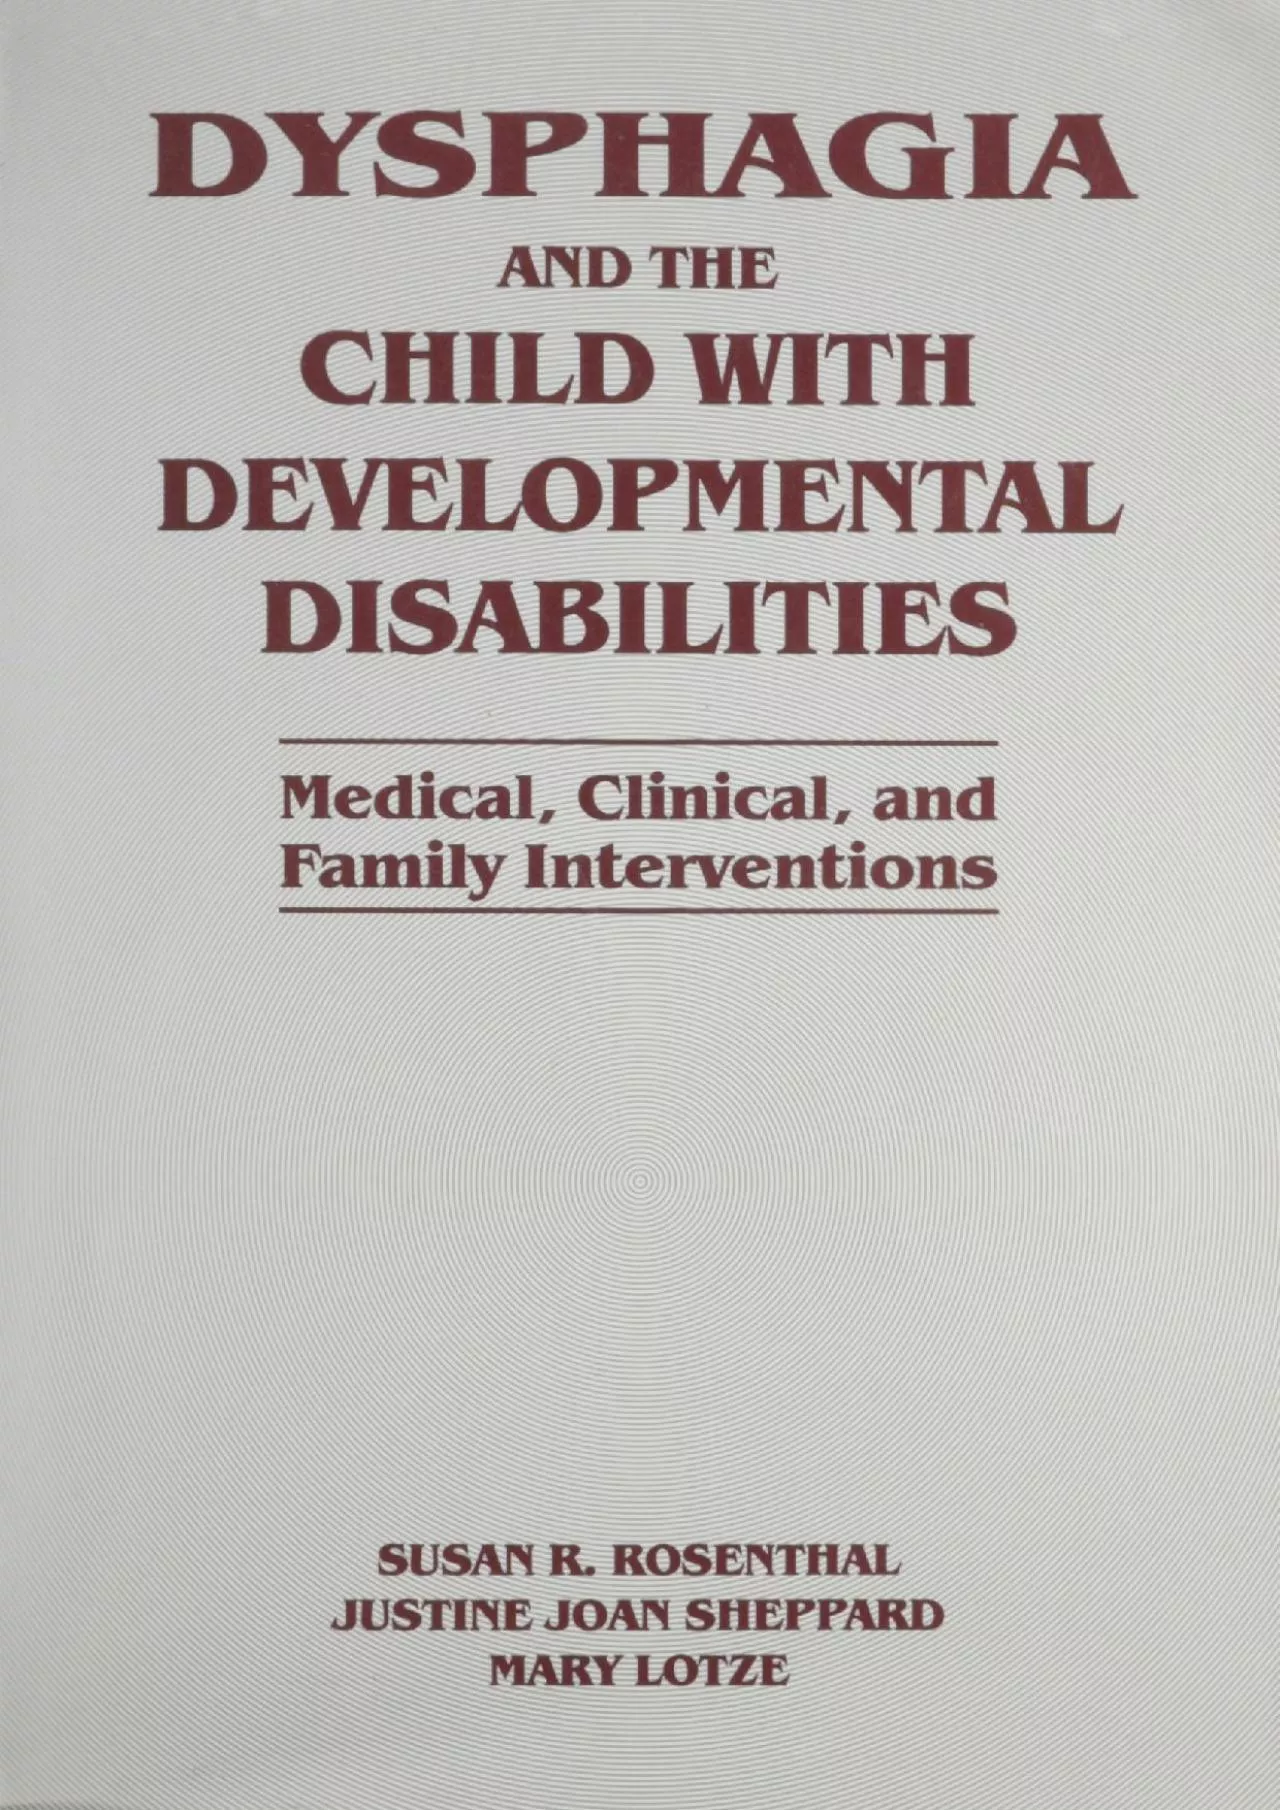 (EBOOK)-Dysphagia and the Child with Developmental Disabilities: Medical Clinical & Family